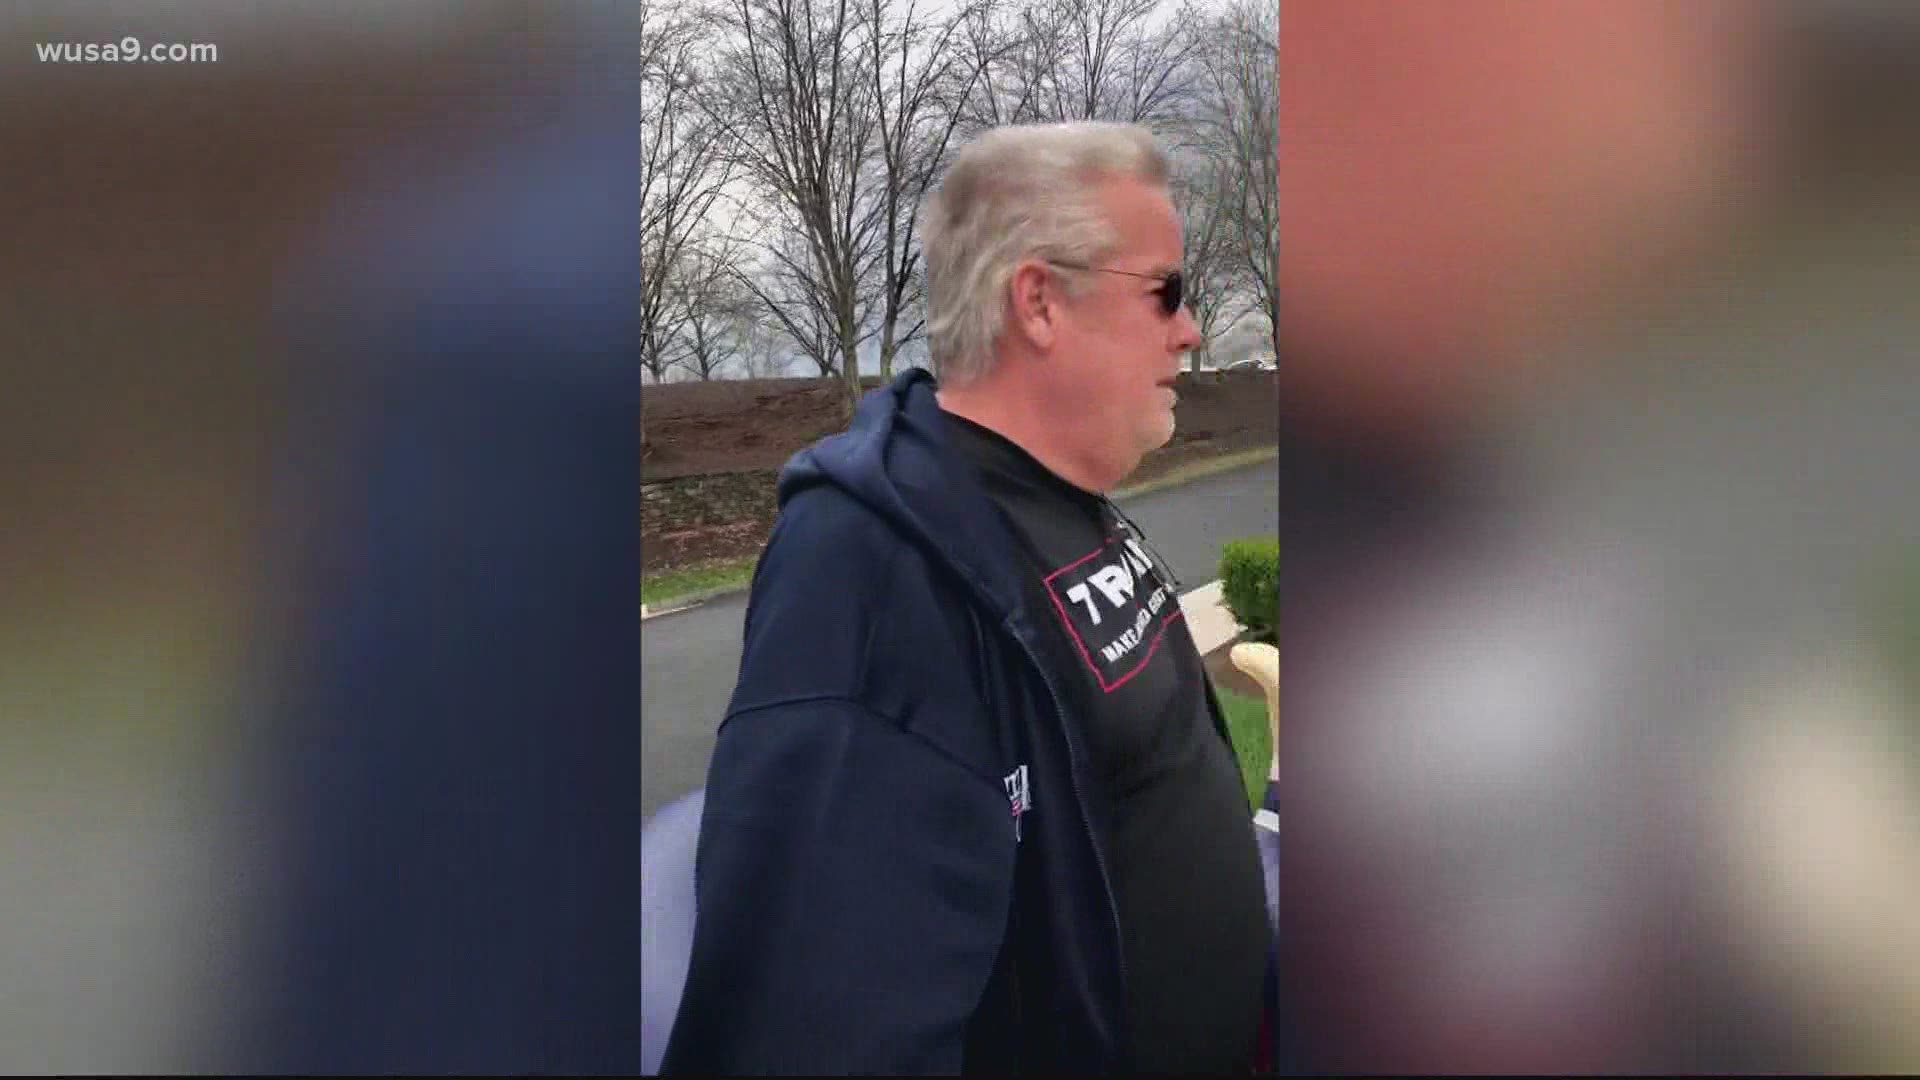 A 61-year-old man was arrested Sunday for simple assault after an incident Saturday outside of Trump National Golf Club in Sterling, Virginia